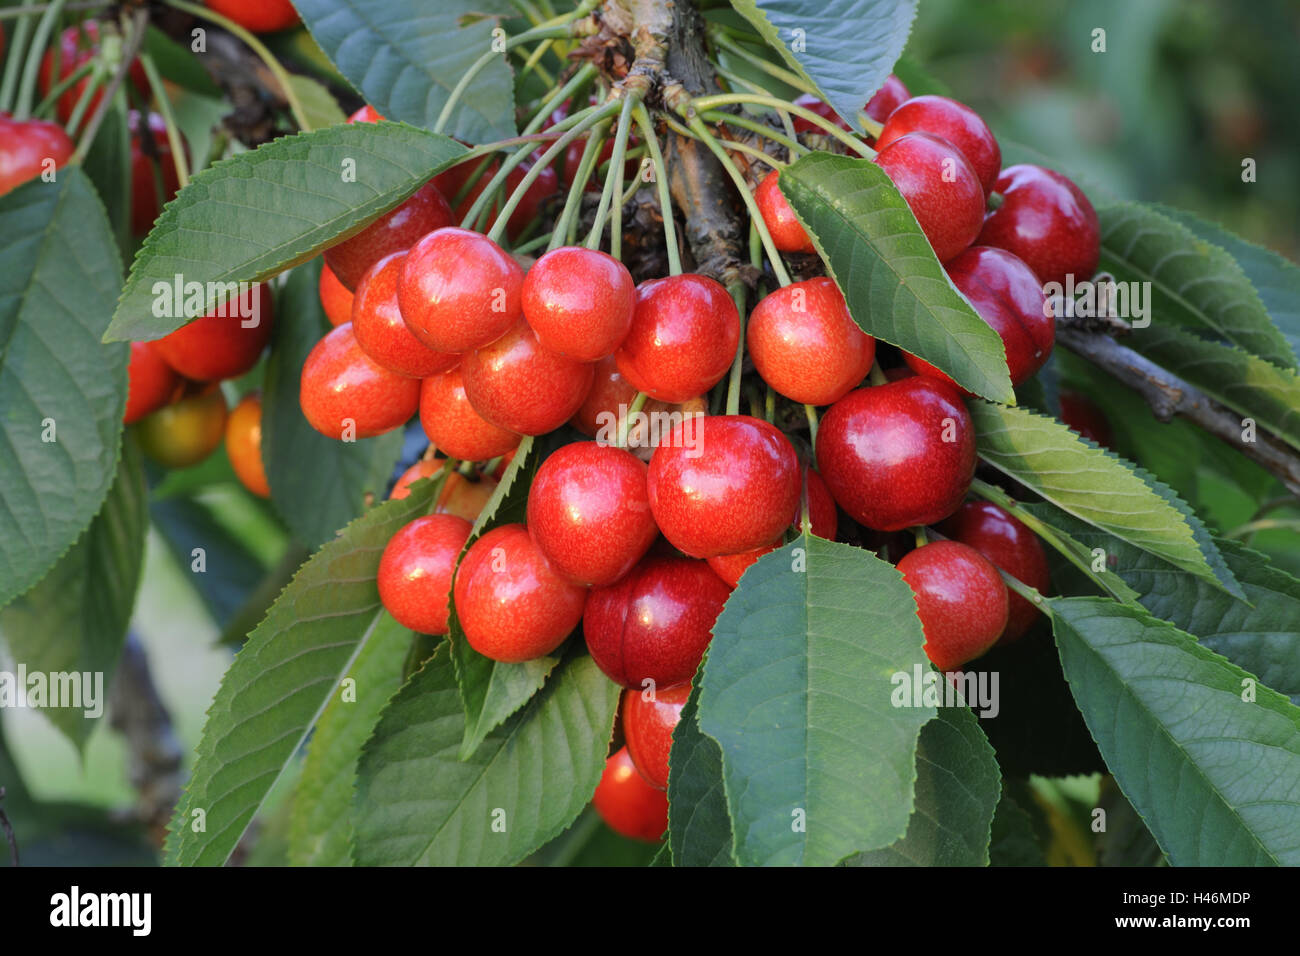 Cherries, ripe, medium close-up, fruit, stone fruit, fruits, red, fruity, low-calorie, rose plant, sweet cherries, branch, detail, Food, cherry tree, fruit-tree, rich in vitamins, ripe for harvest, freshly, healthy, course, leaves, Stock Photo